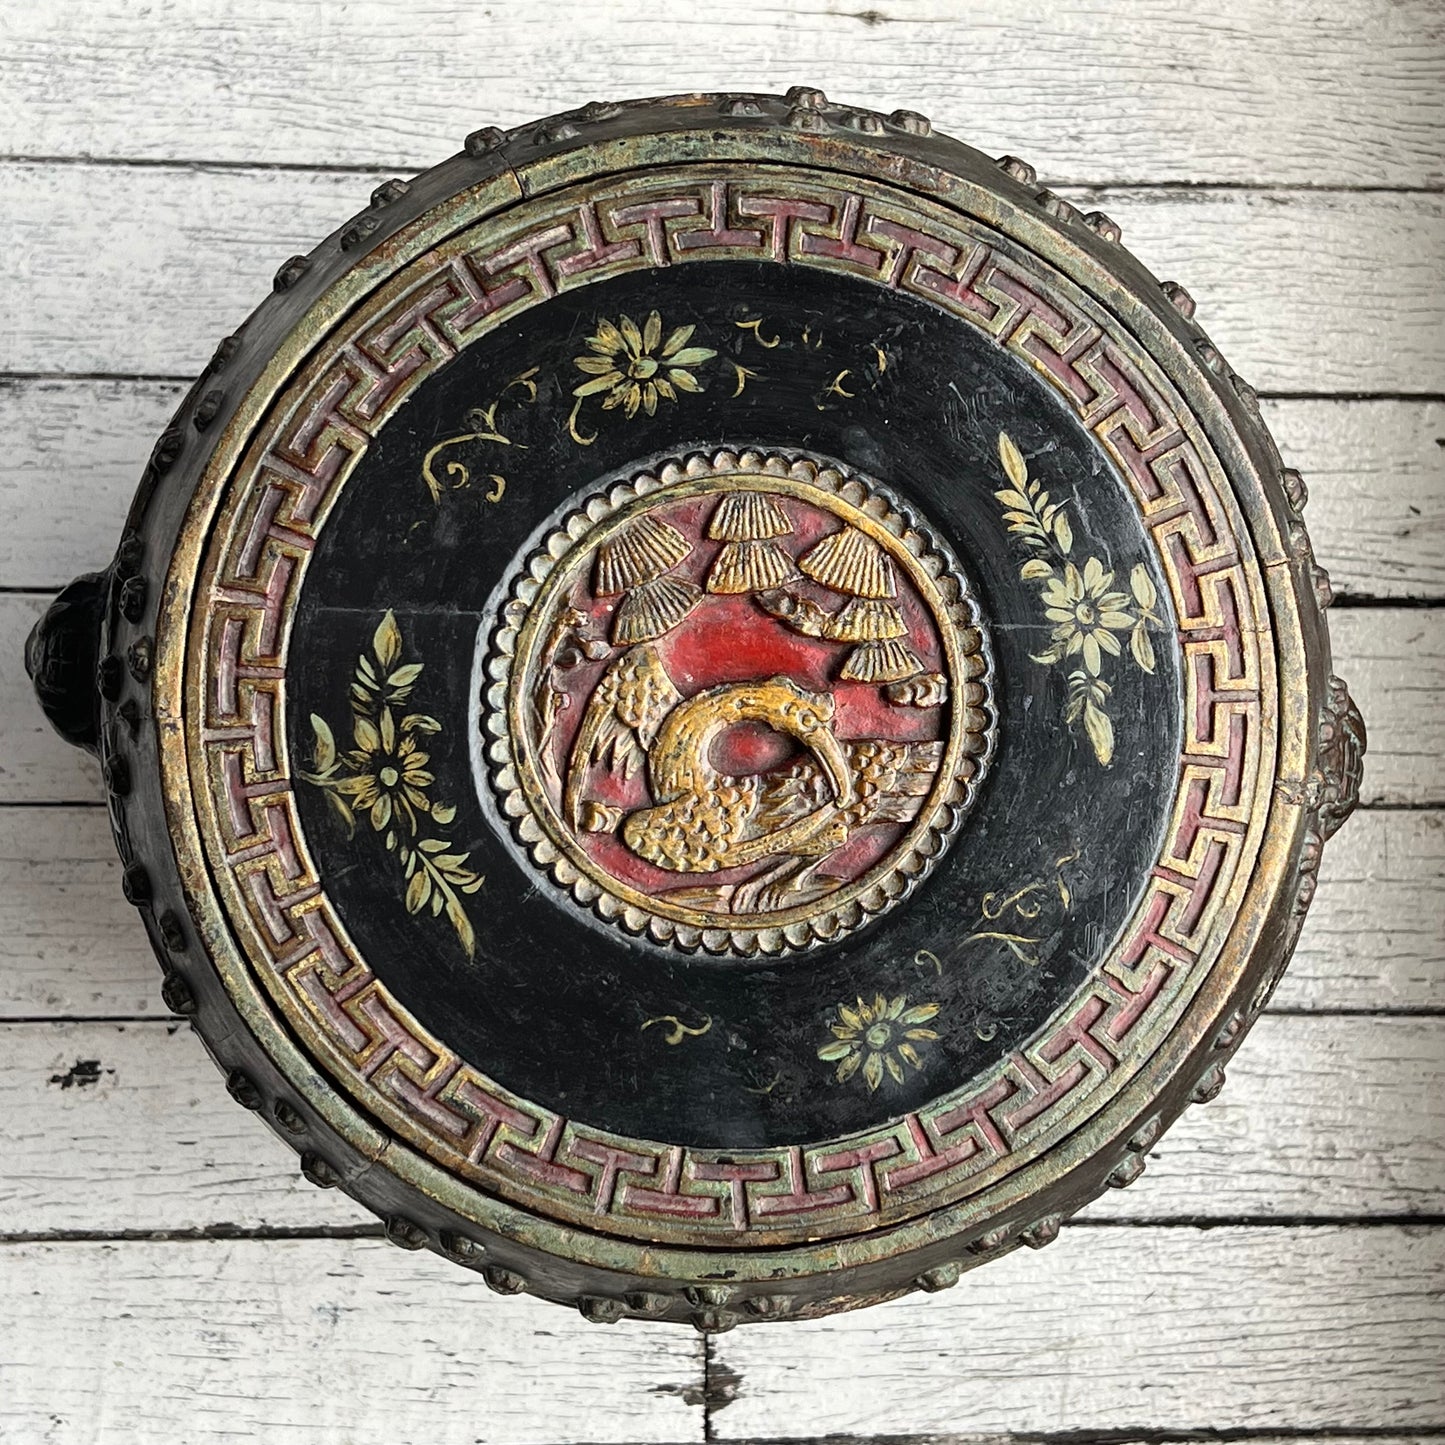 Rare and stunning pair of mid to late 19th century Qing Dynasty hand-painted and lacquered spice barrels